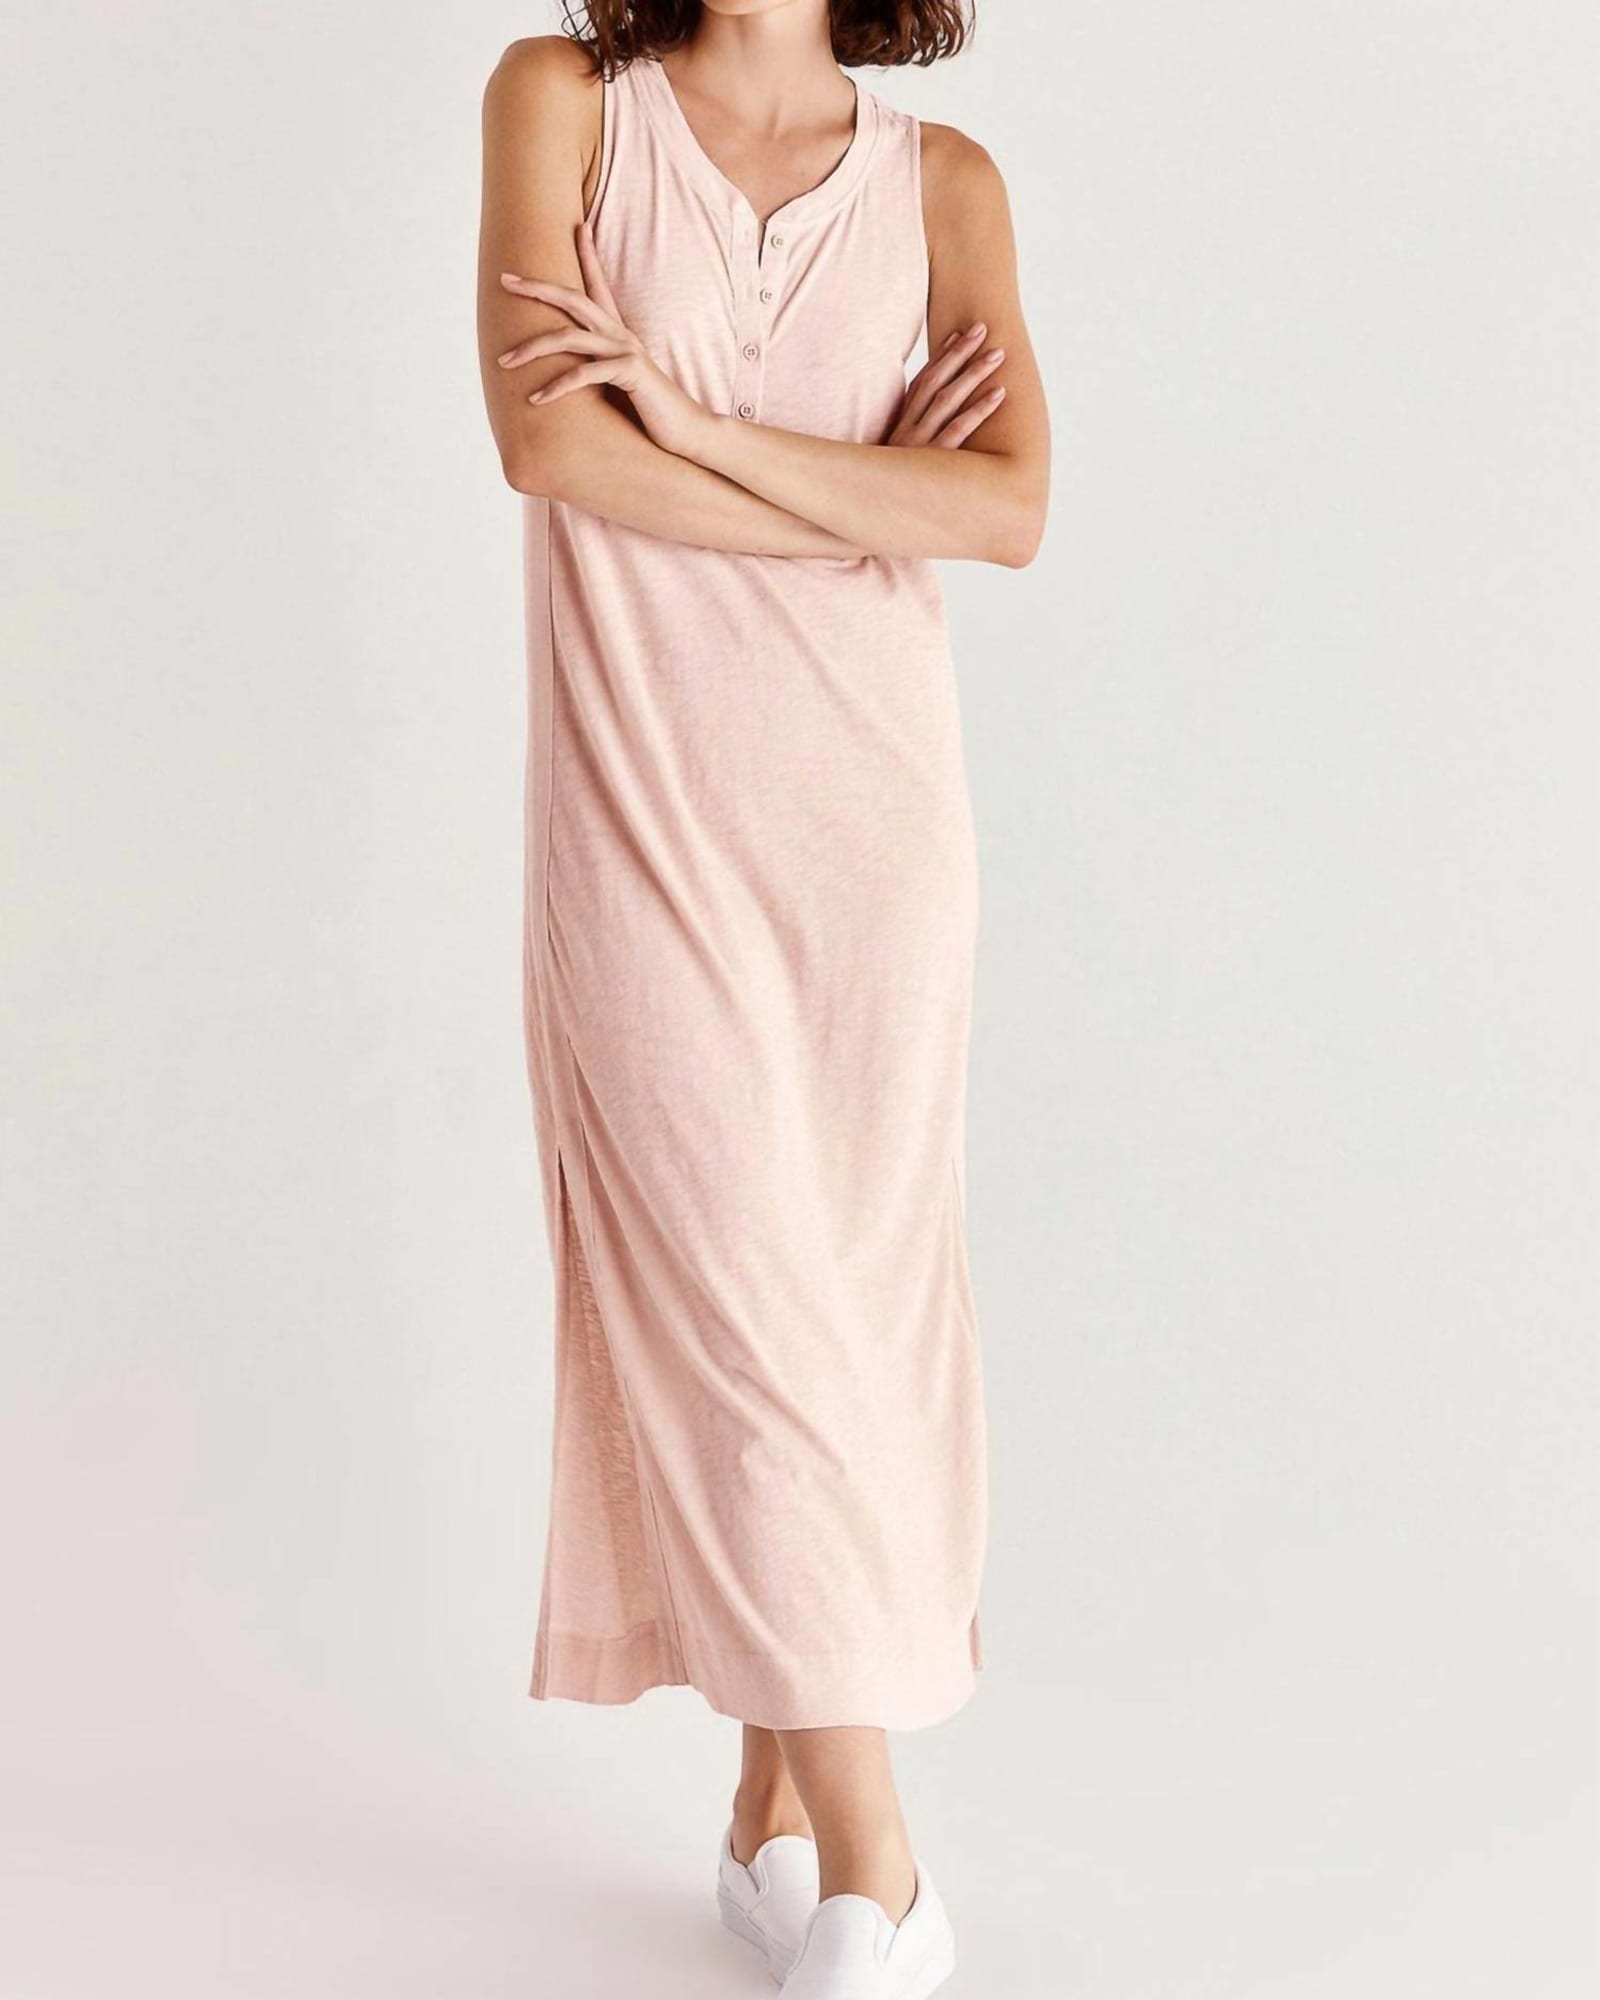 The Summertown Maxi Dress in Muted Blush | Muted Blush